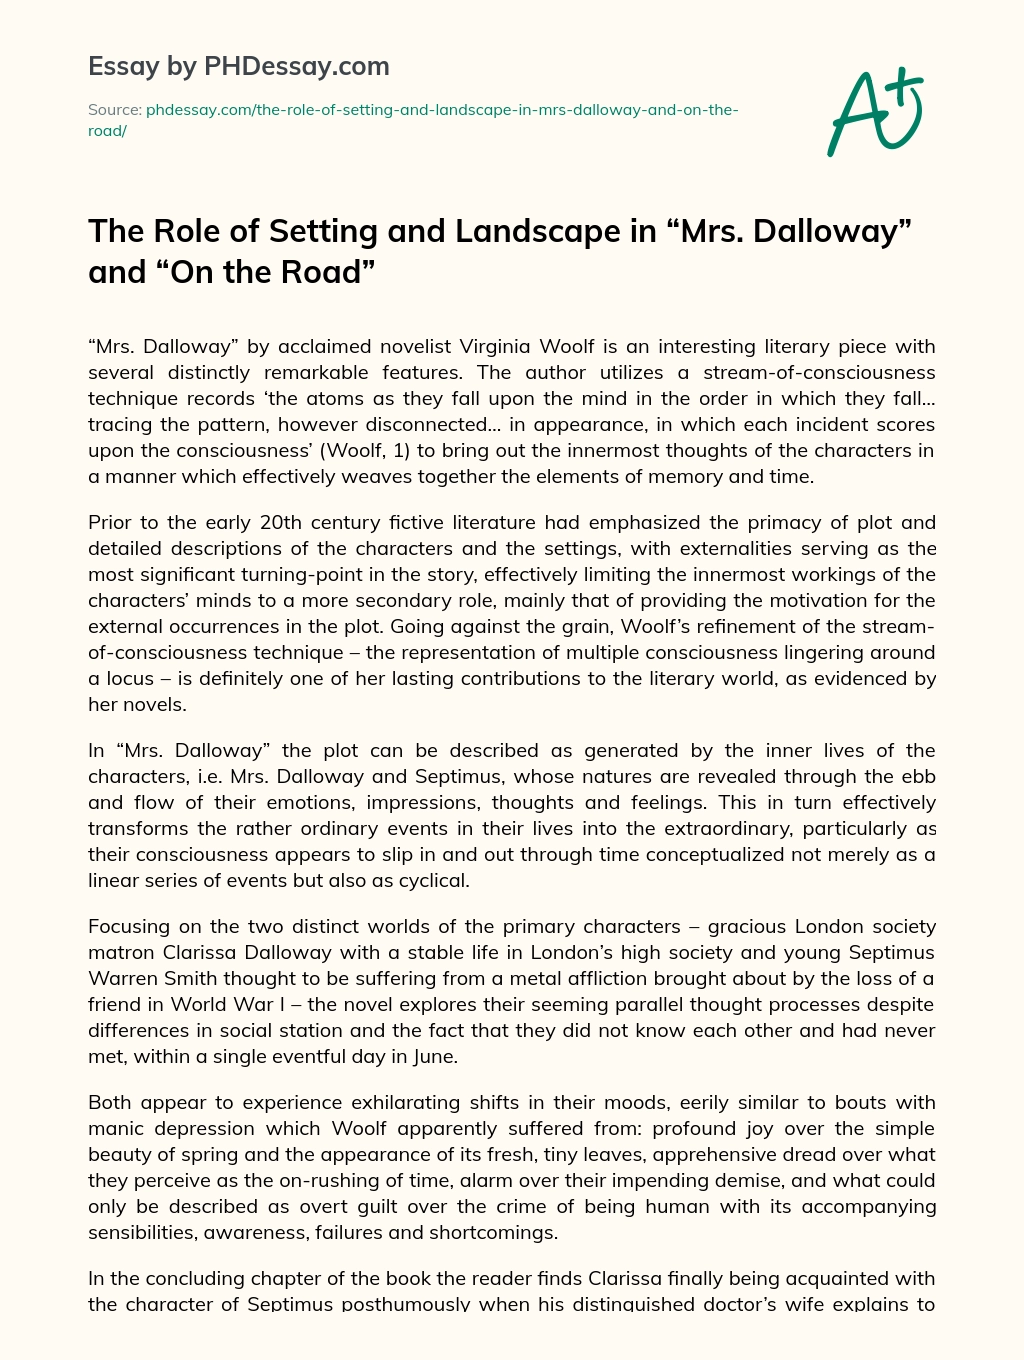 The Role of Setting and Landscape in “Mrs. Dalloway” and “On the Road” essay